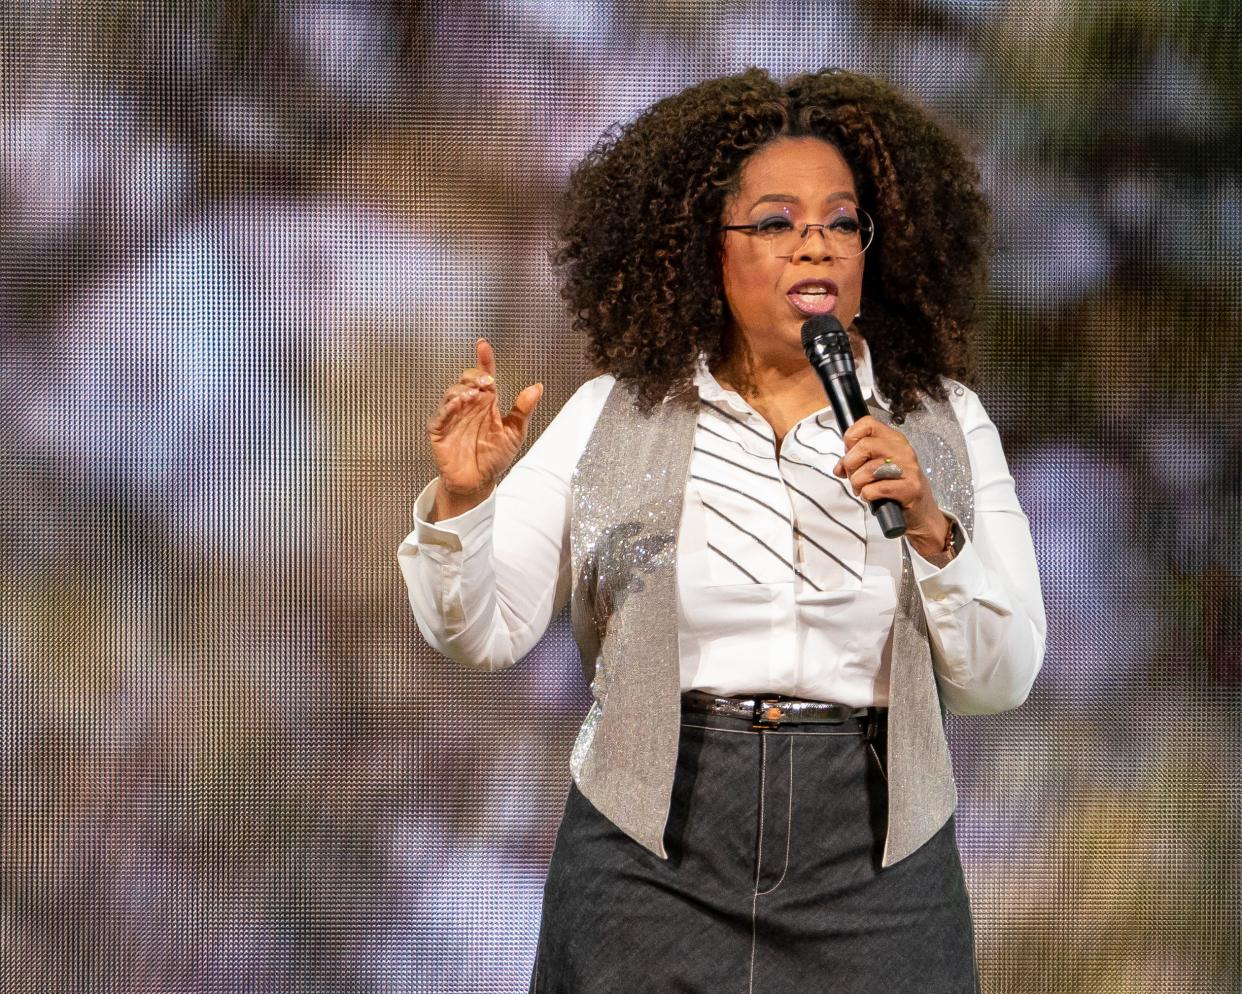 Oprah Winfrey hosts coronavirus special COVID19 — The Deadly Impact On Black America from isolation.